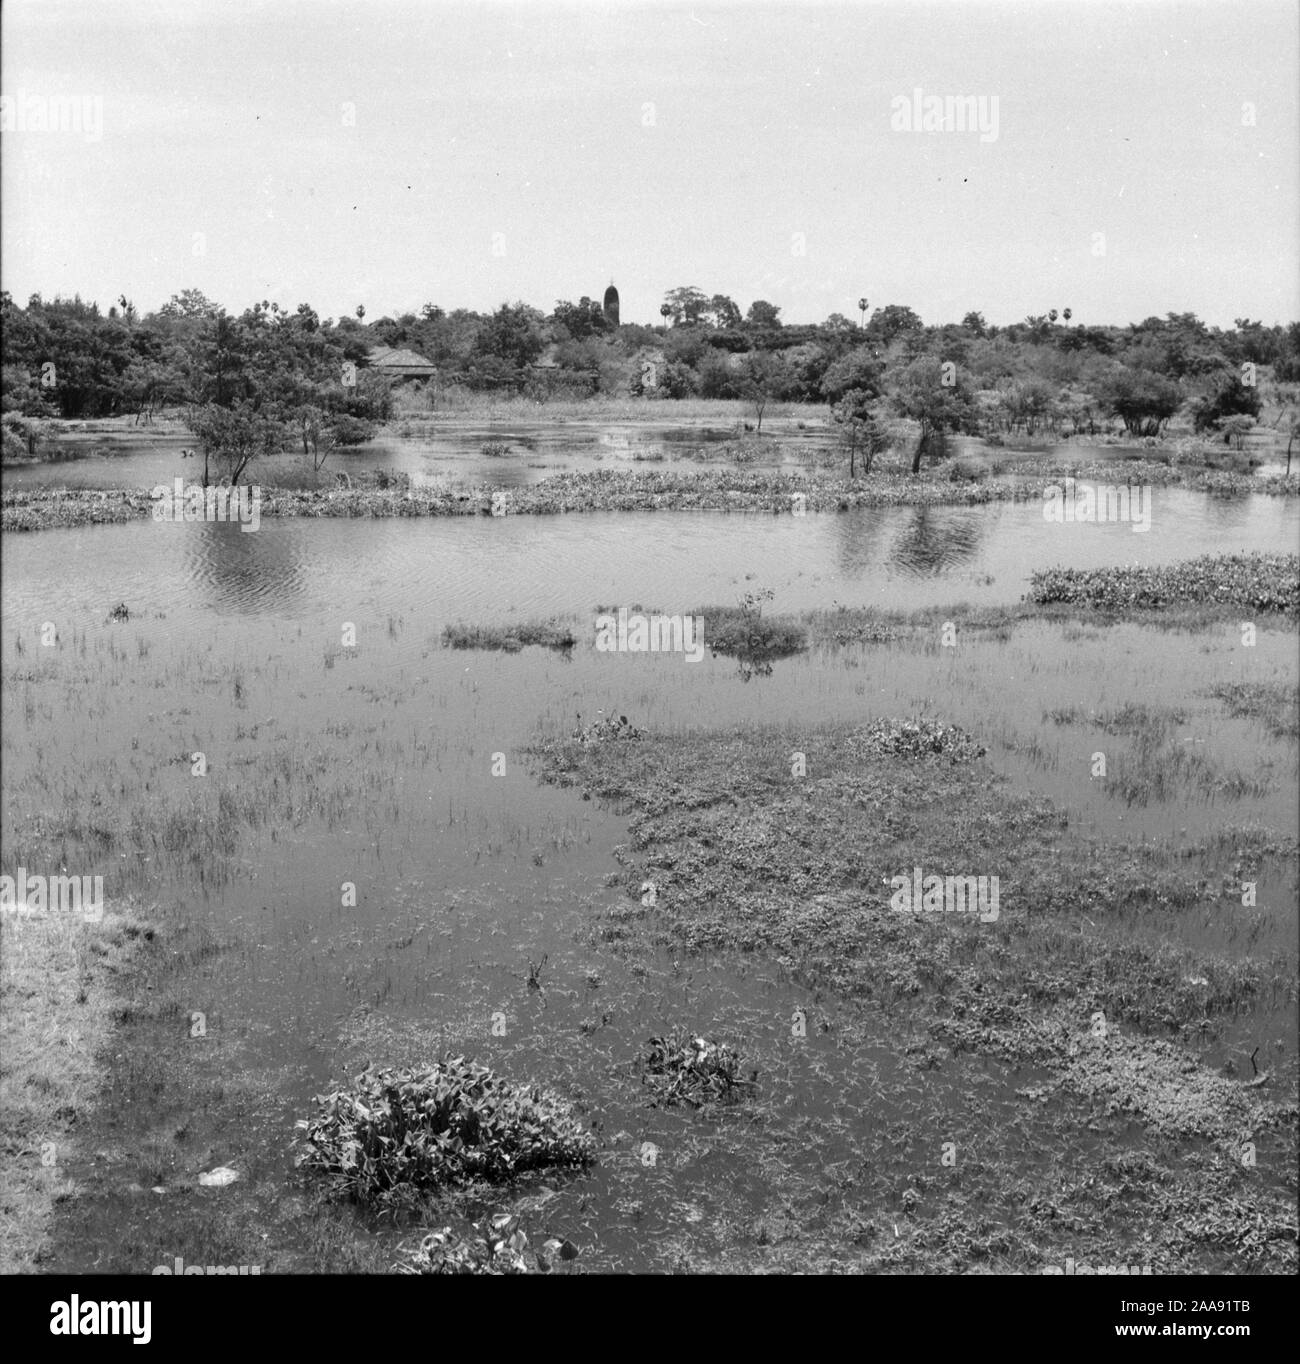 Ayutthaya Historical Park while being restored by the Leader with donation from PM Unu of Burma as shown in this set of photographs taken on 7Oct 1956 Stock Photo